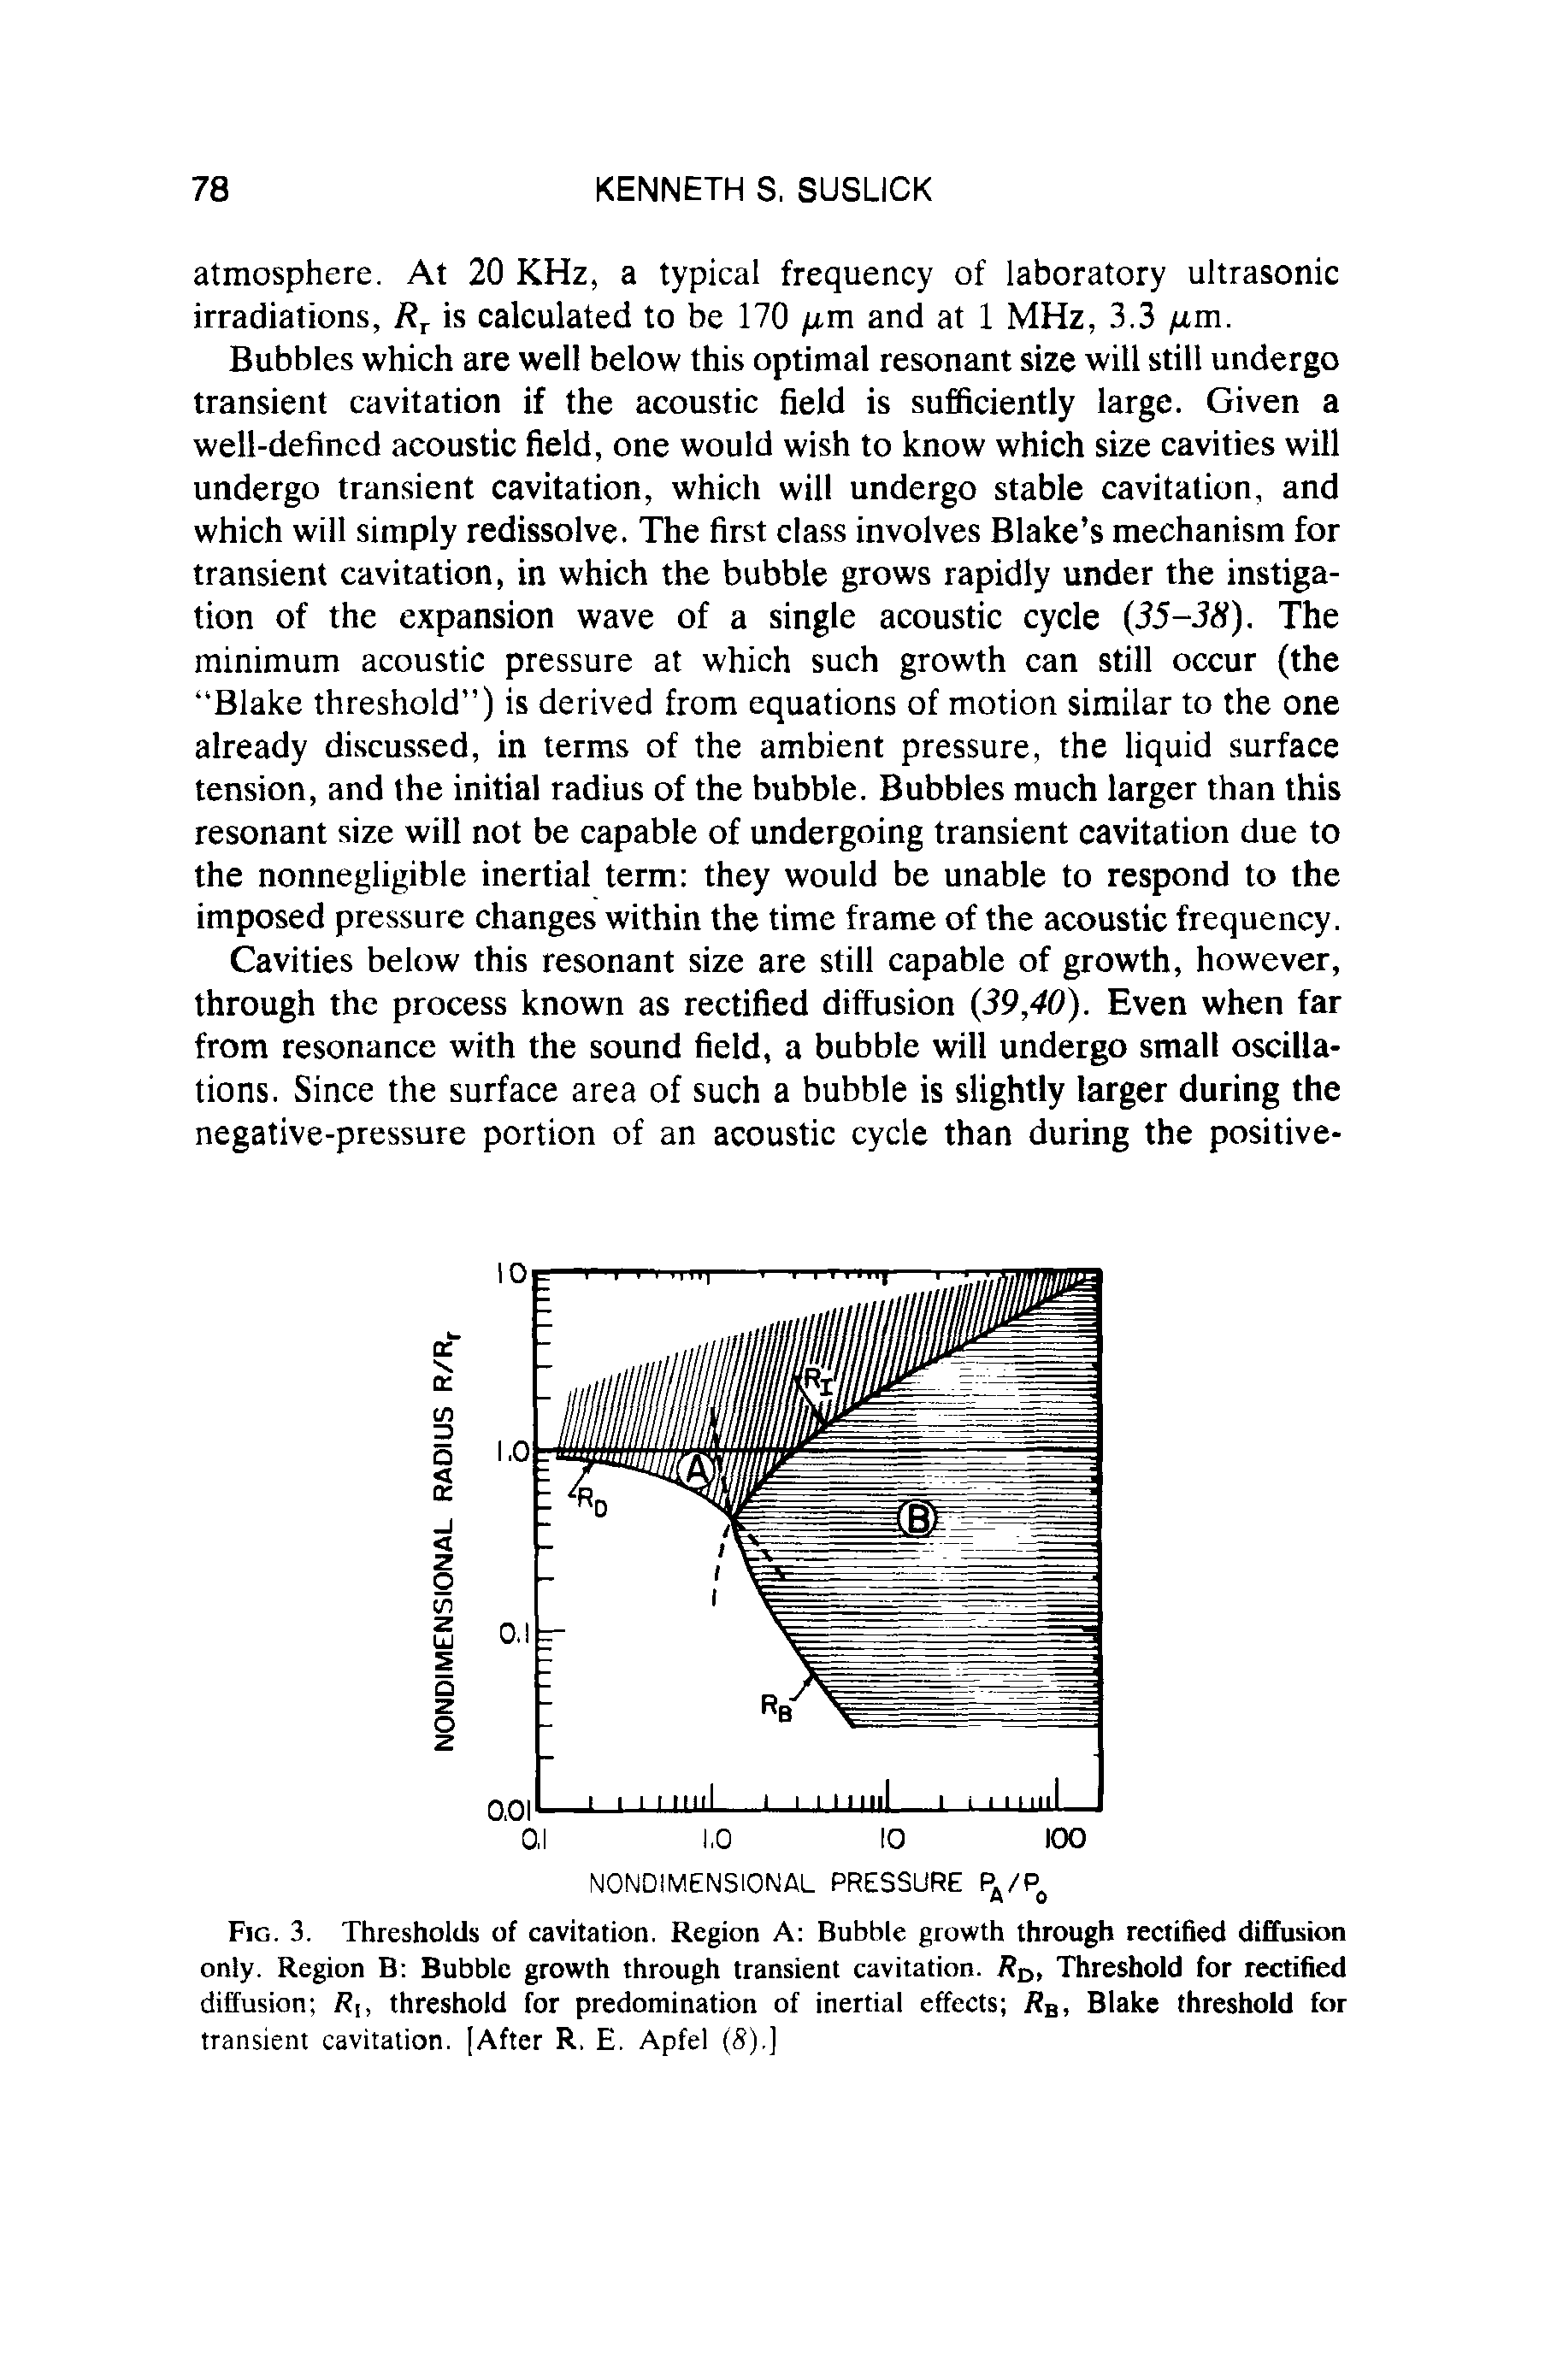 Fig. 3. Thresholds of cavitation. Region A Bubble growth through rectified diffusion only. Region B Bubble growth through transient cavitation. RD, Threshold for rectified diffusion Rlt threshold for predomination of inertial effects RB, Blake threshold for transient cavitation. [After R. E. Apfel (S).]...